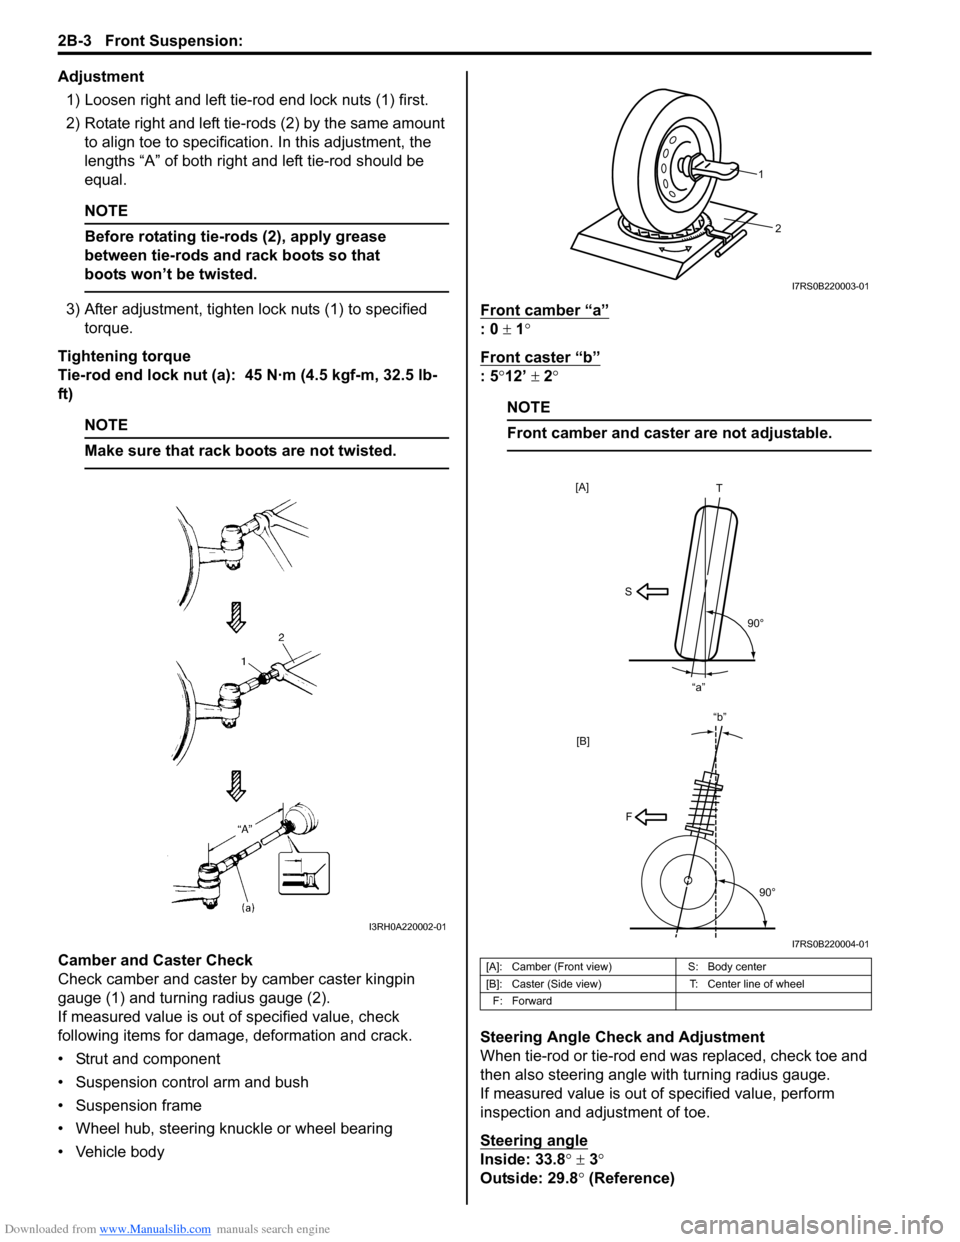 SUZUKI SWIFT 2004 2.G Service Workshop Manual Downloaded from www.Manualslib.com manuals search engine 2B-3 Front Suspension: 
Adjustment1) Loosen right and left tie-rod end lock nuts (1) first.
2) Rotate right and left tie-rods (2) by the same a